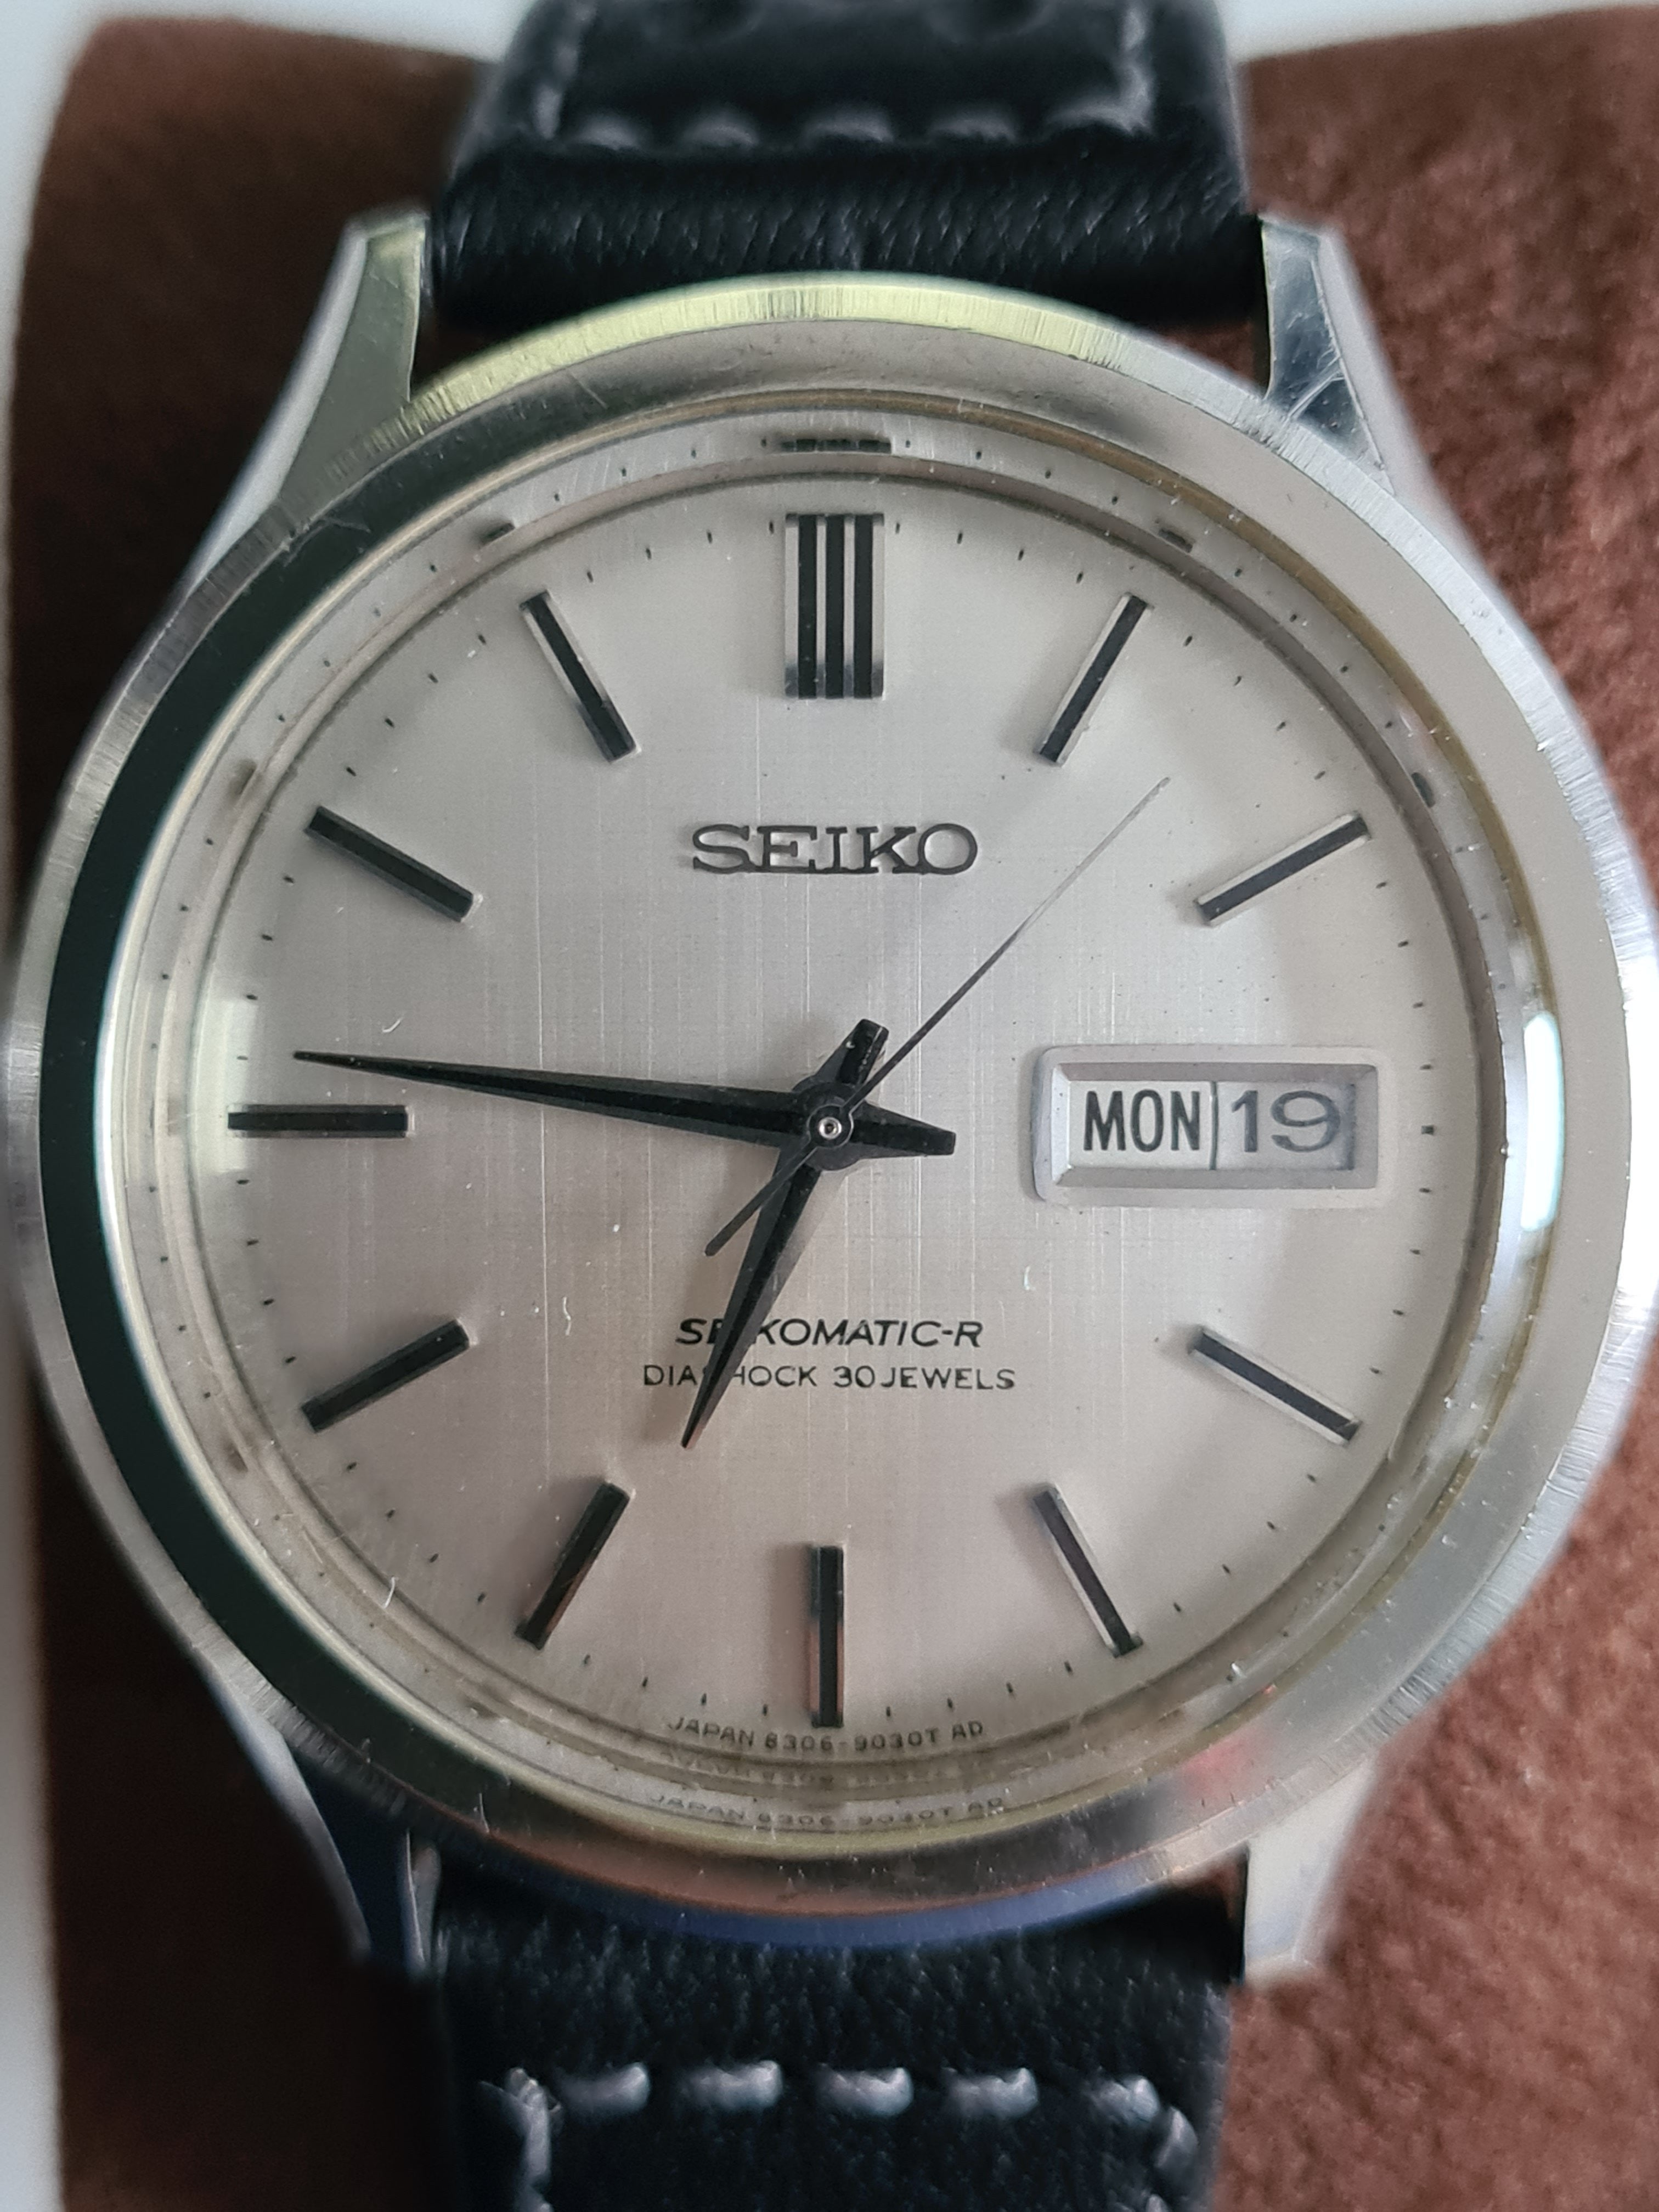 O, as in SeikO | The Watch Site